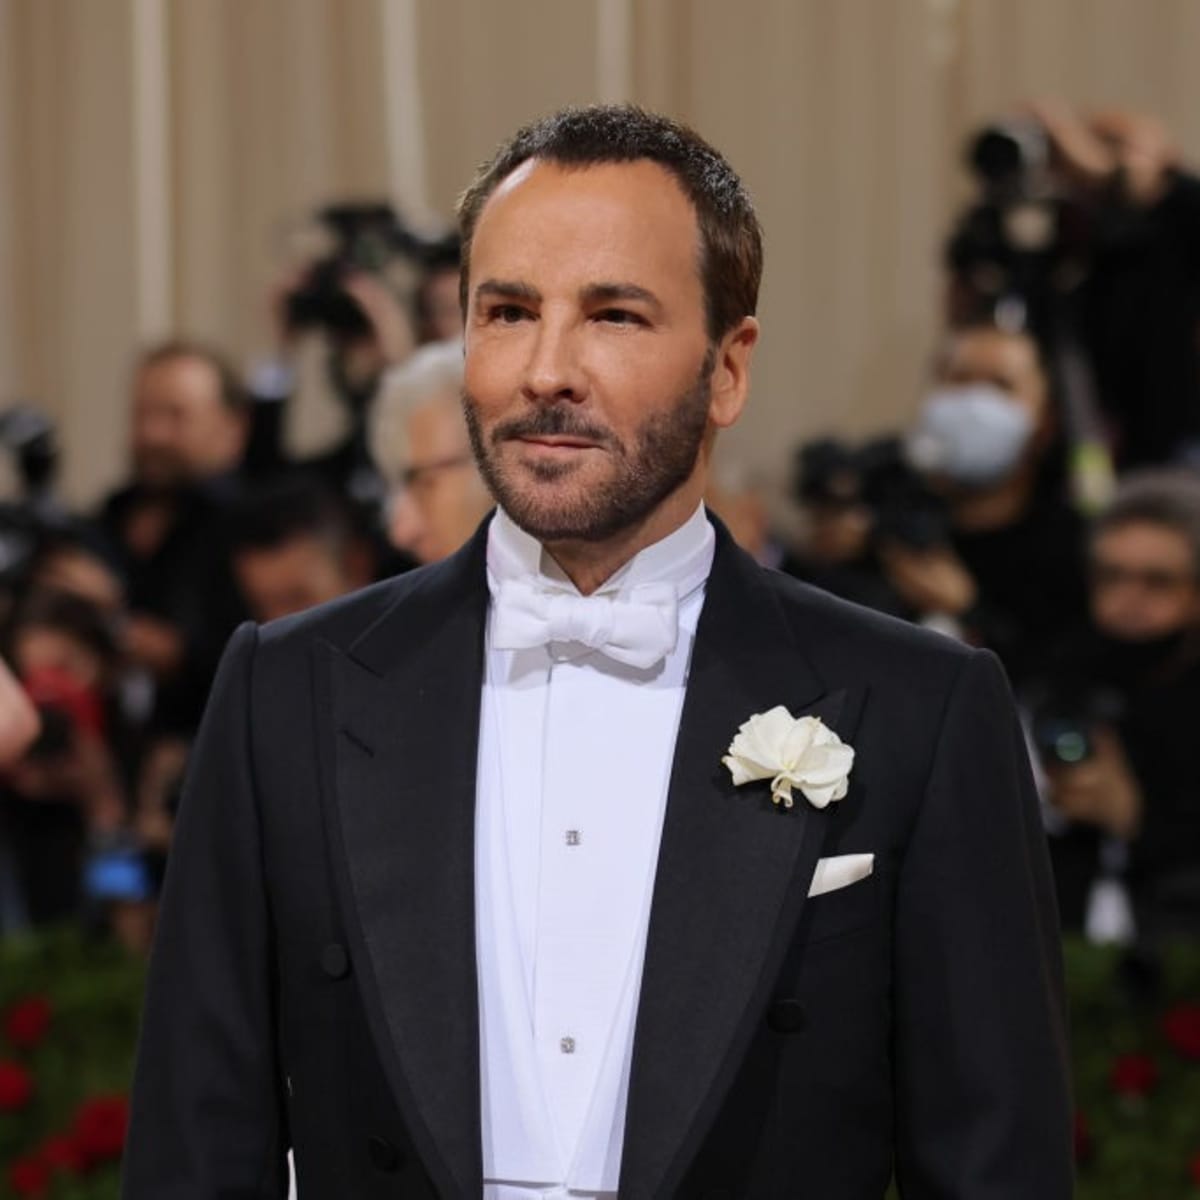 Tom Ford bows out as creative director at namesake fashion label